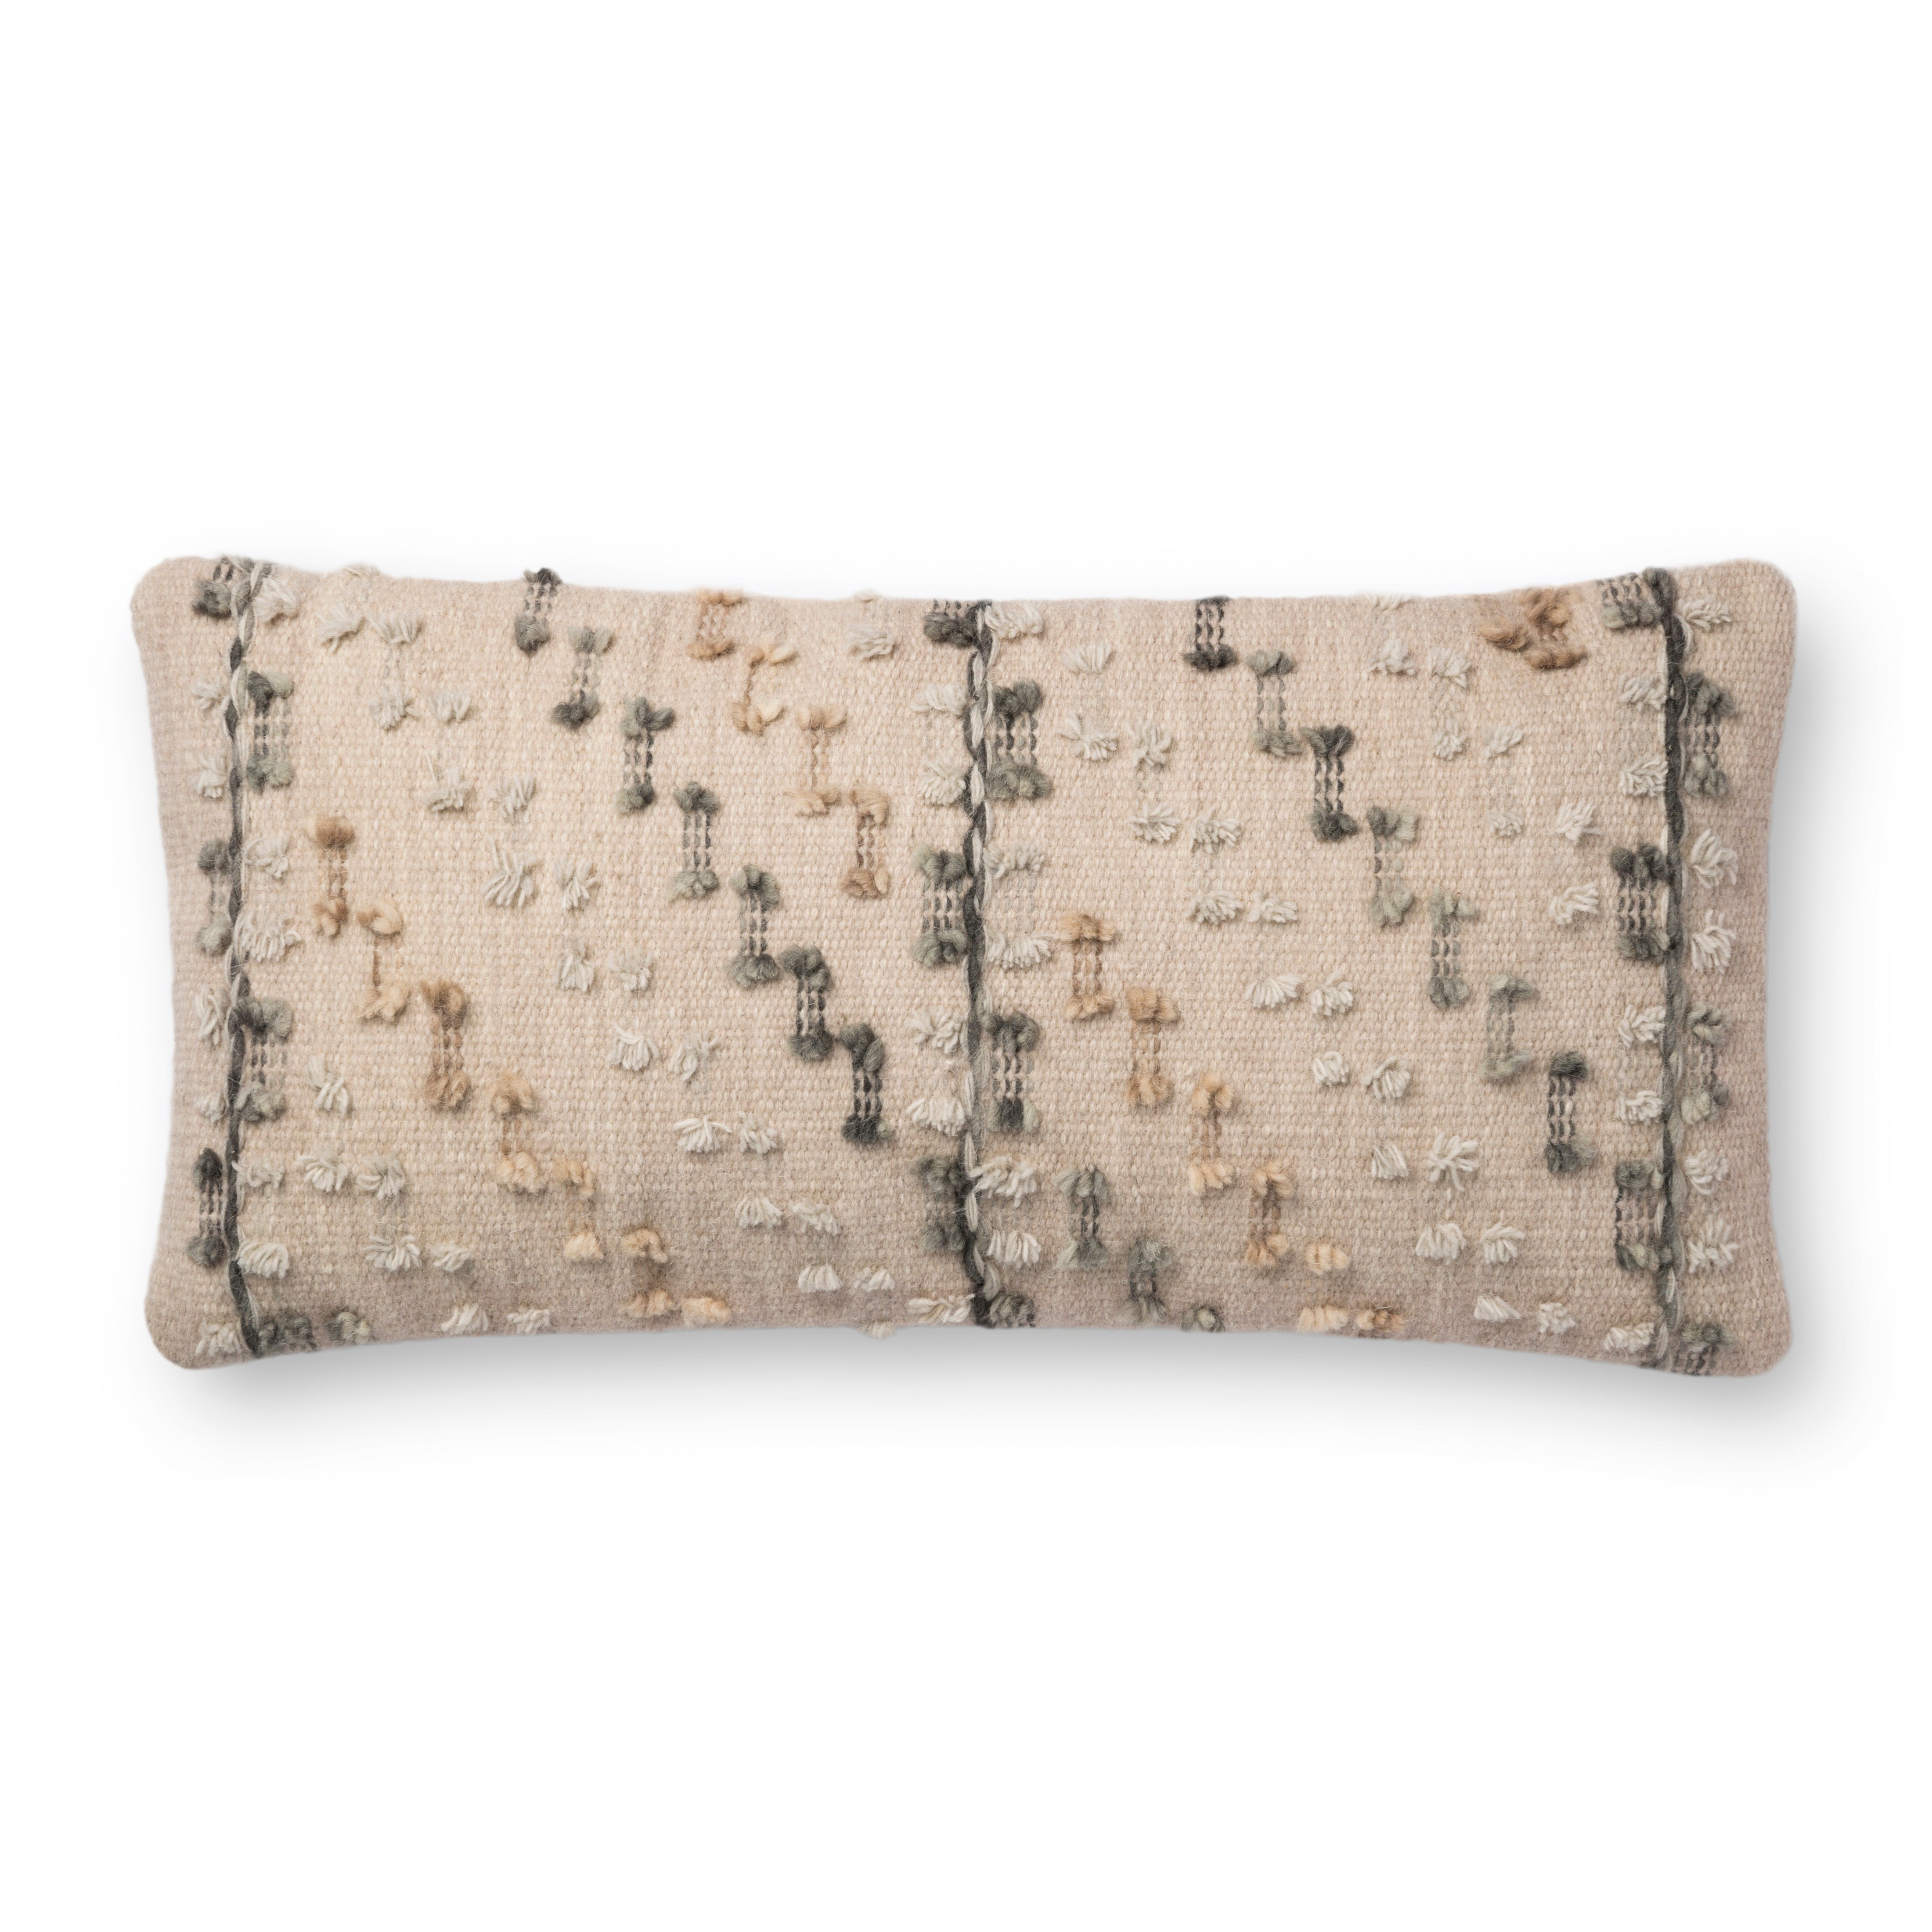 Magnolia Home by Joanna Gaines PILLOWS P1082 GREY / MULTI 12" x 27" Cover Only - Image 1